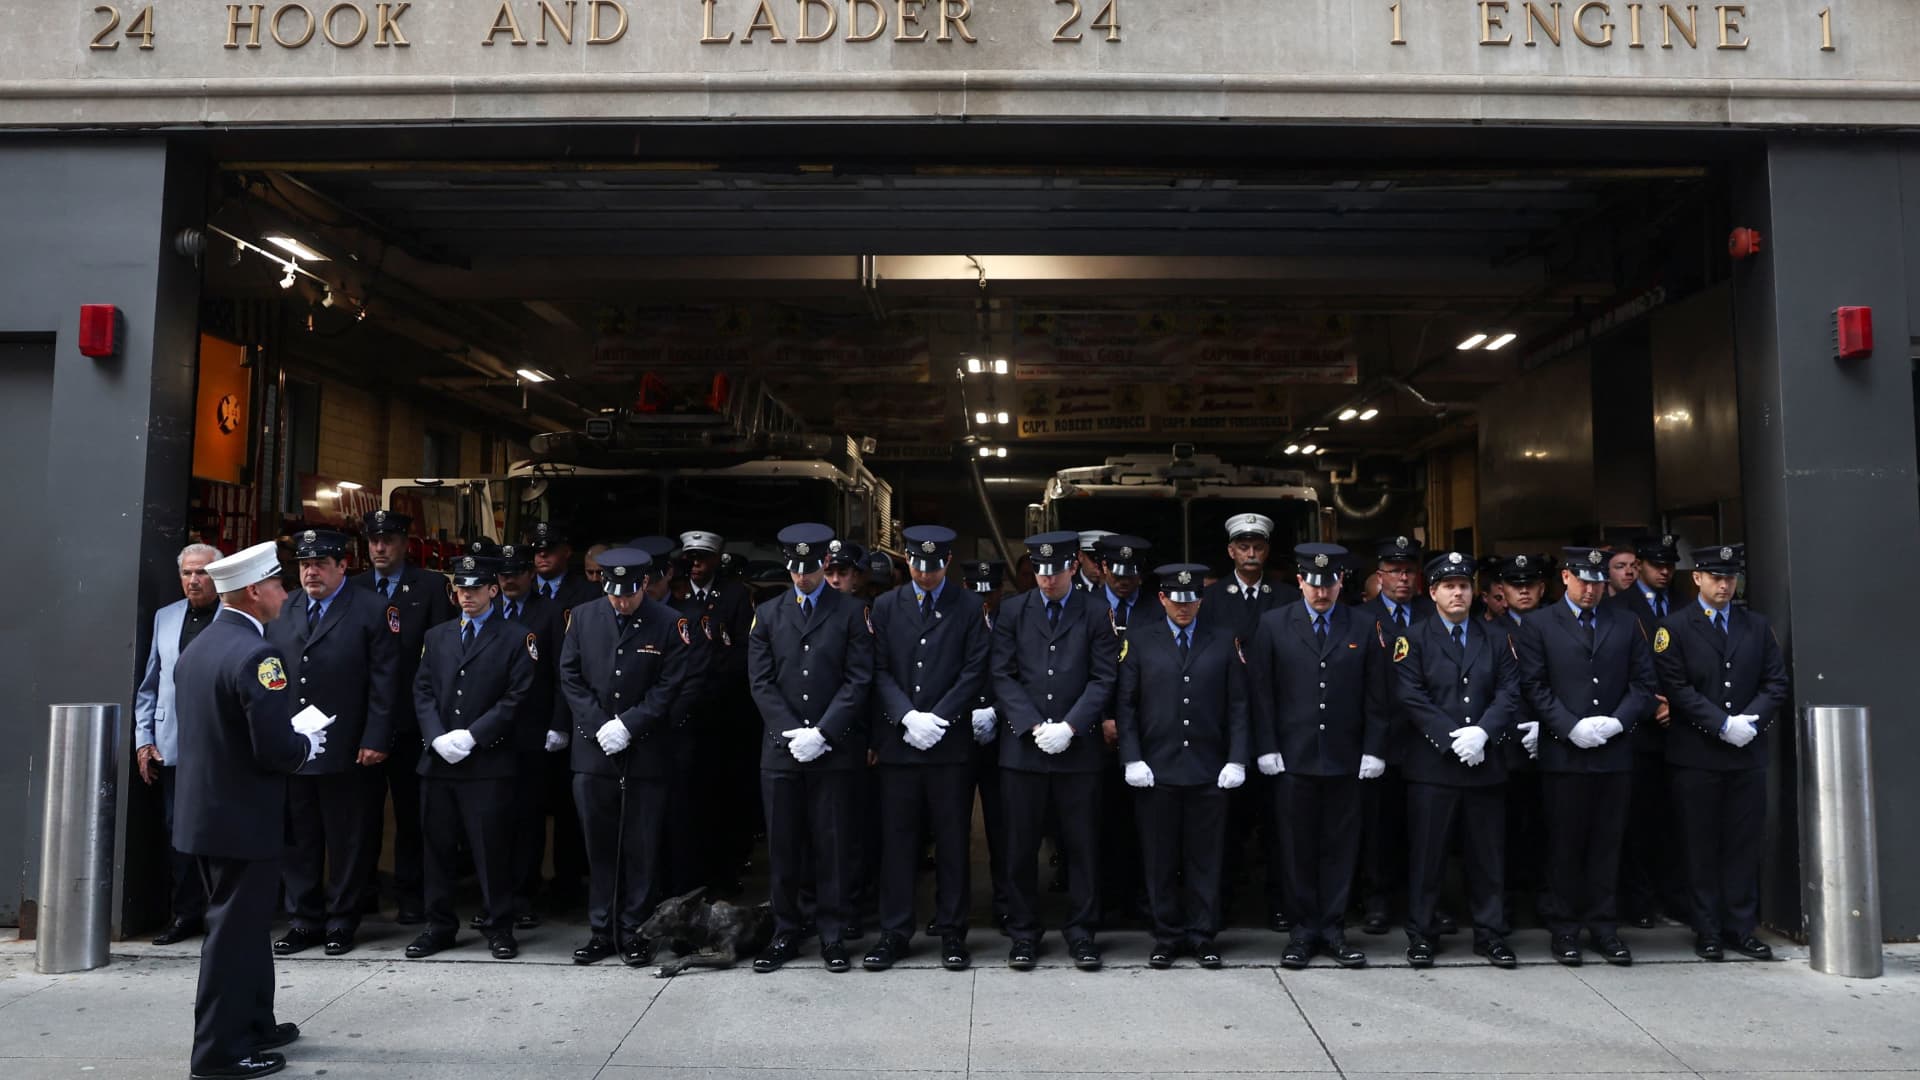 Firefighters from Hook and Ladder 24 Engine 1 fire station in New York City observe a moment of silence on the 22nd anniversary of the 9/11 attacks, Sept. 11, 2023.